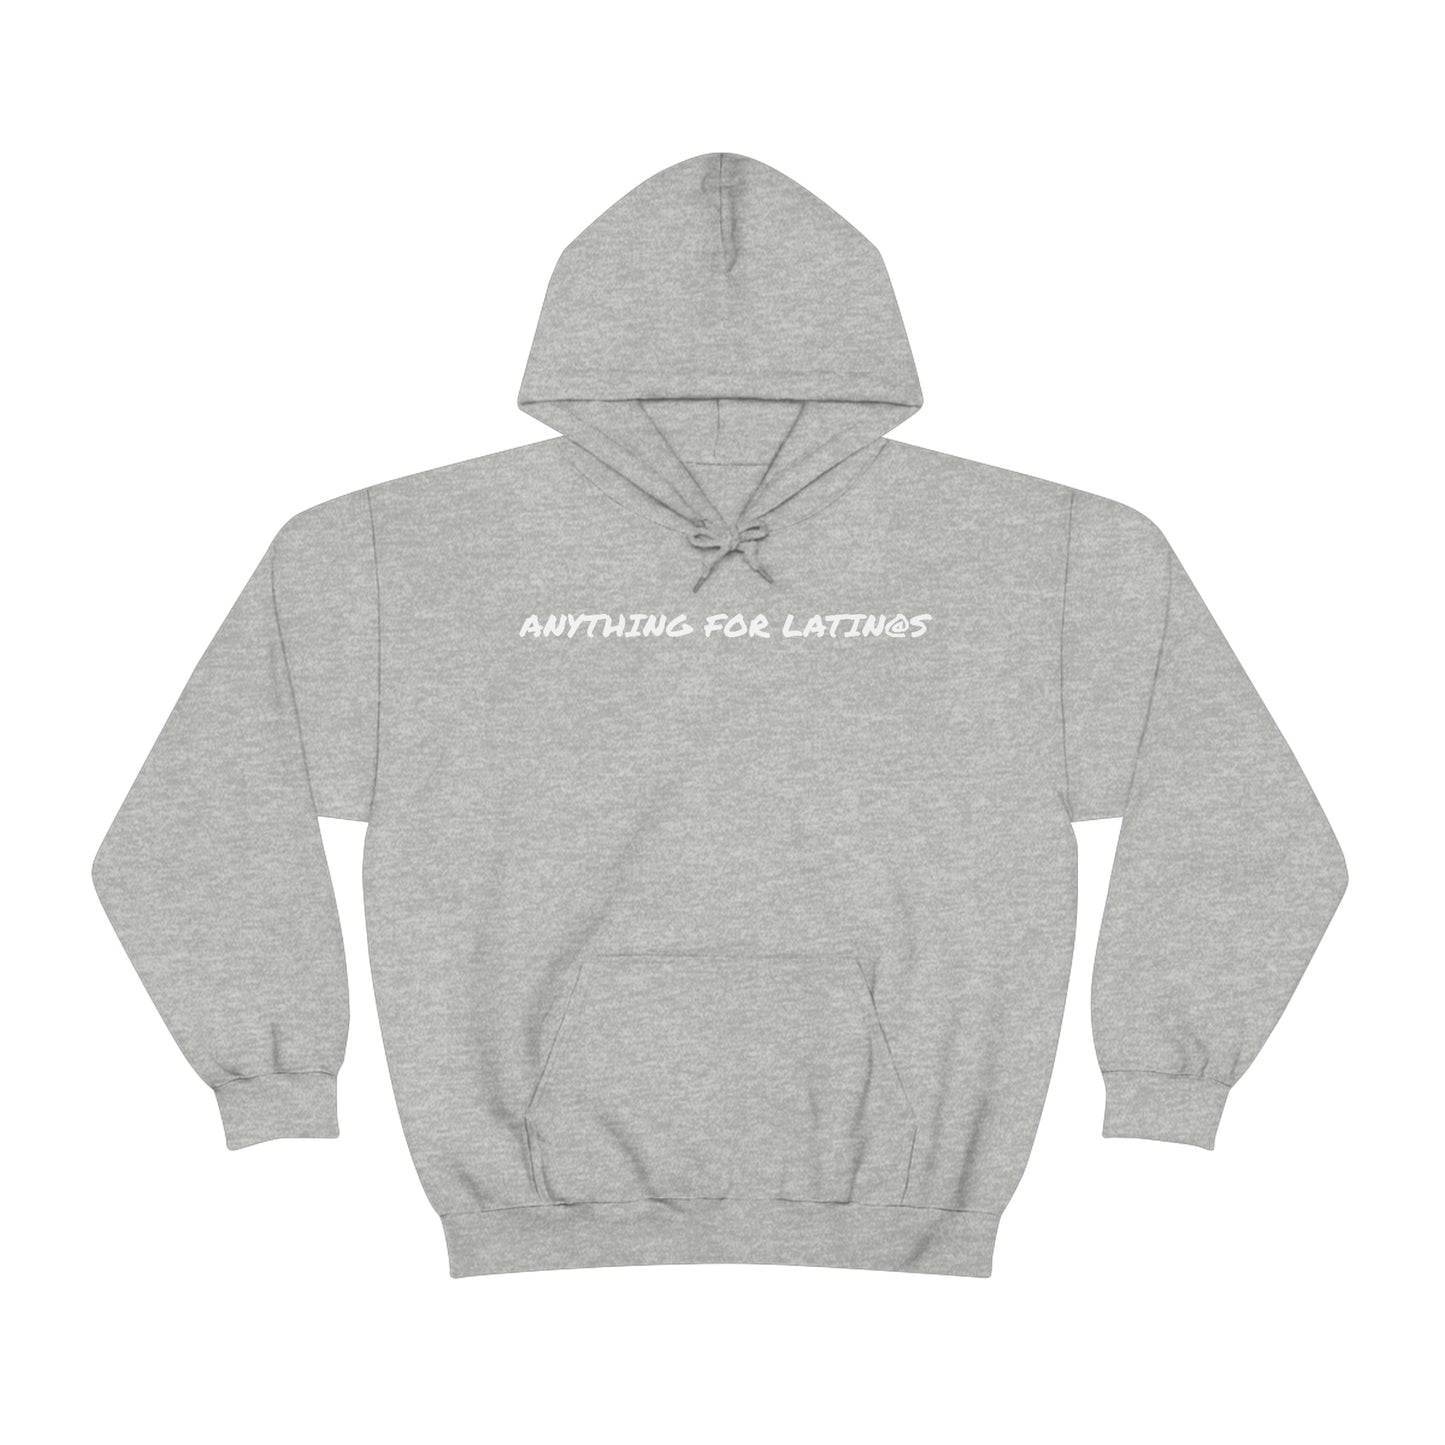 ANYTHING FOR LATIN@S Unisex Heavy Blend™ Hooded Sweatshirt